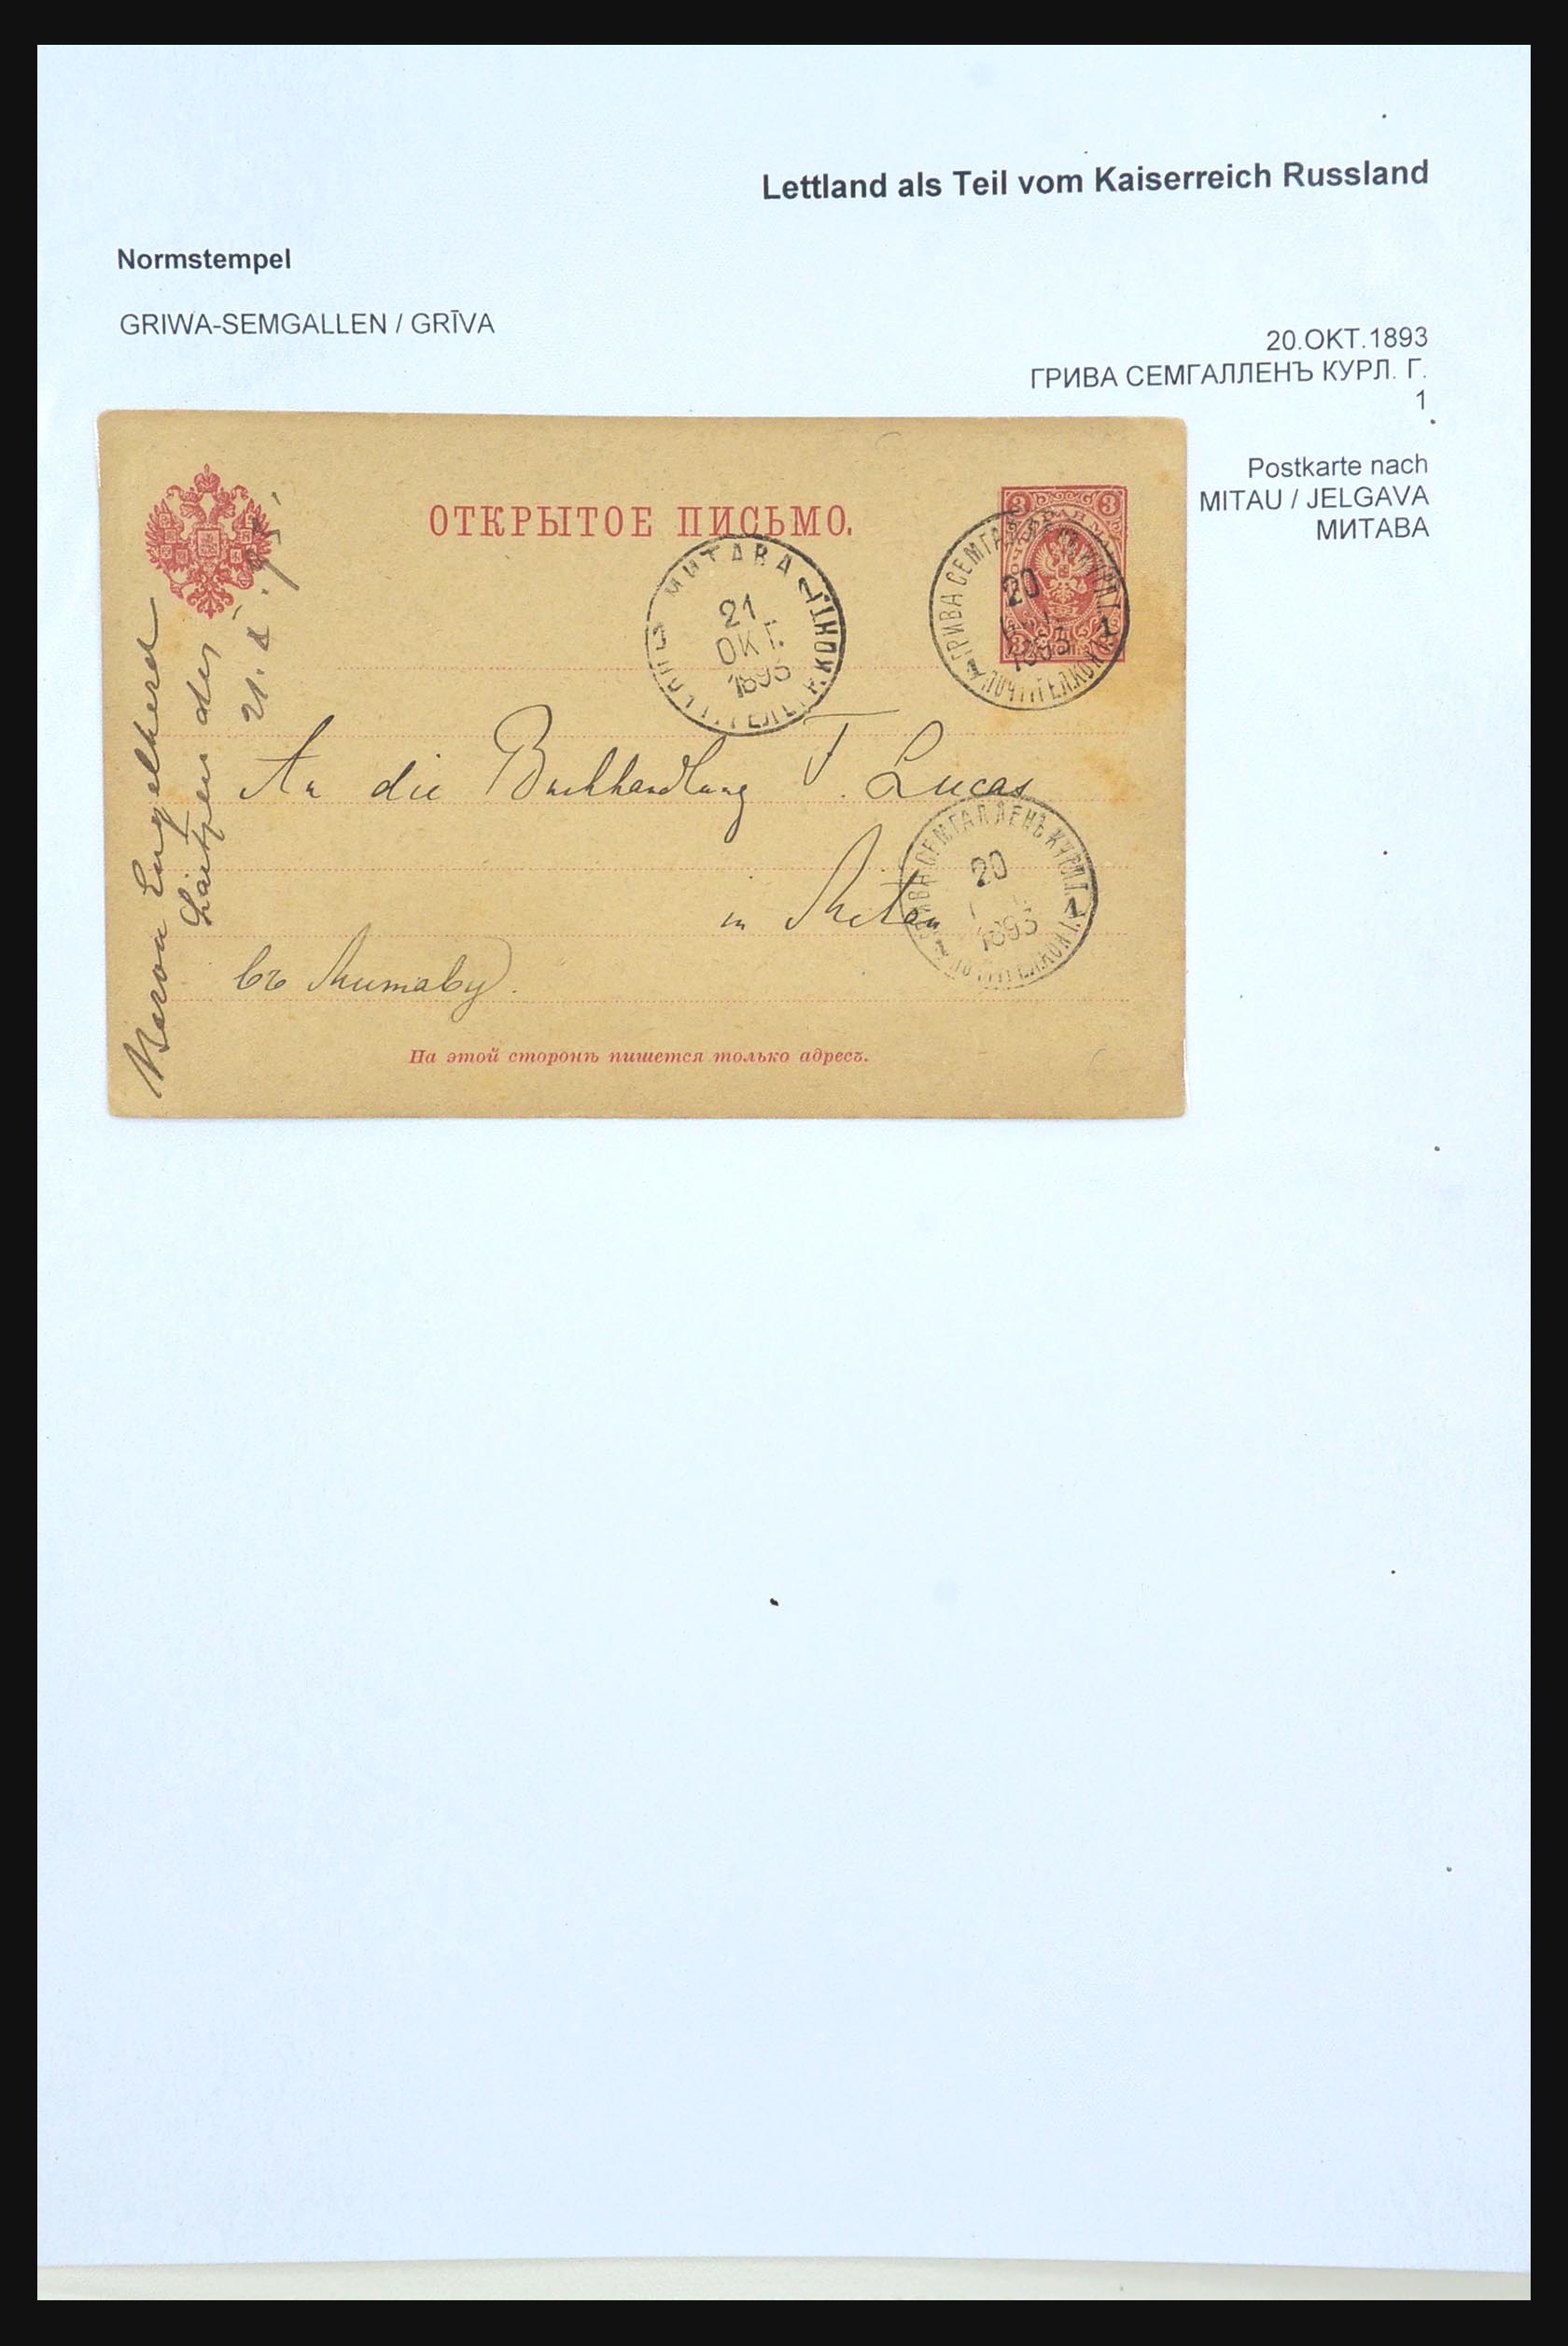 31305 043 - 31305 Latvia as part of Russia 1817-1918.